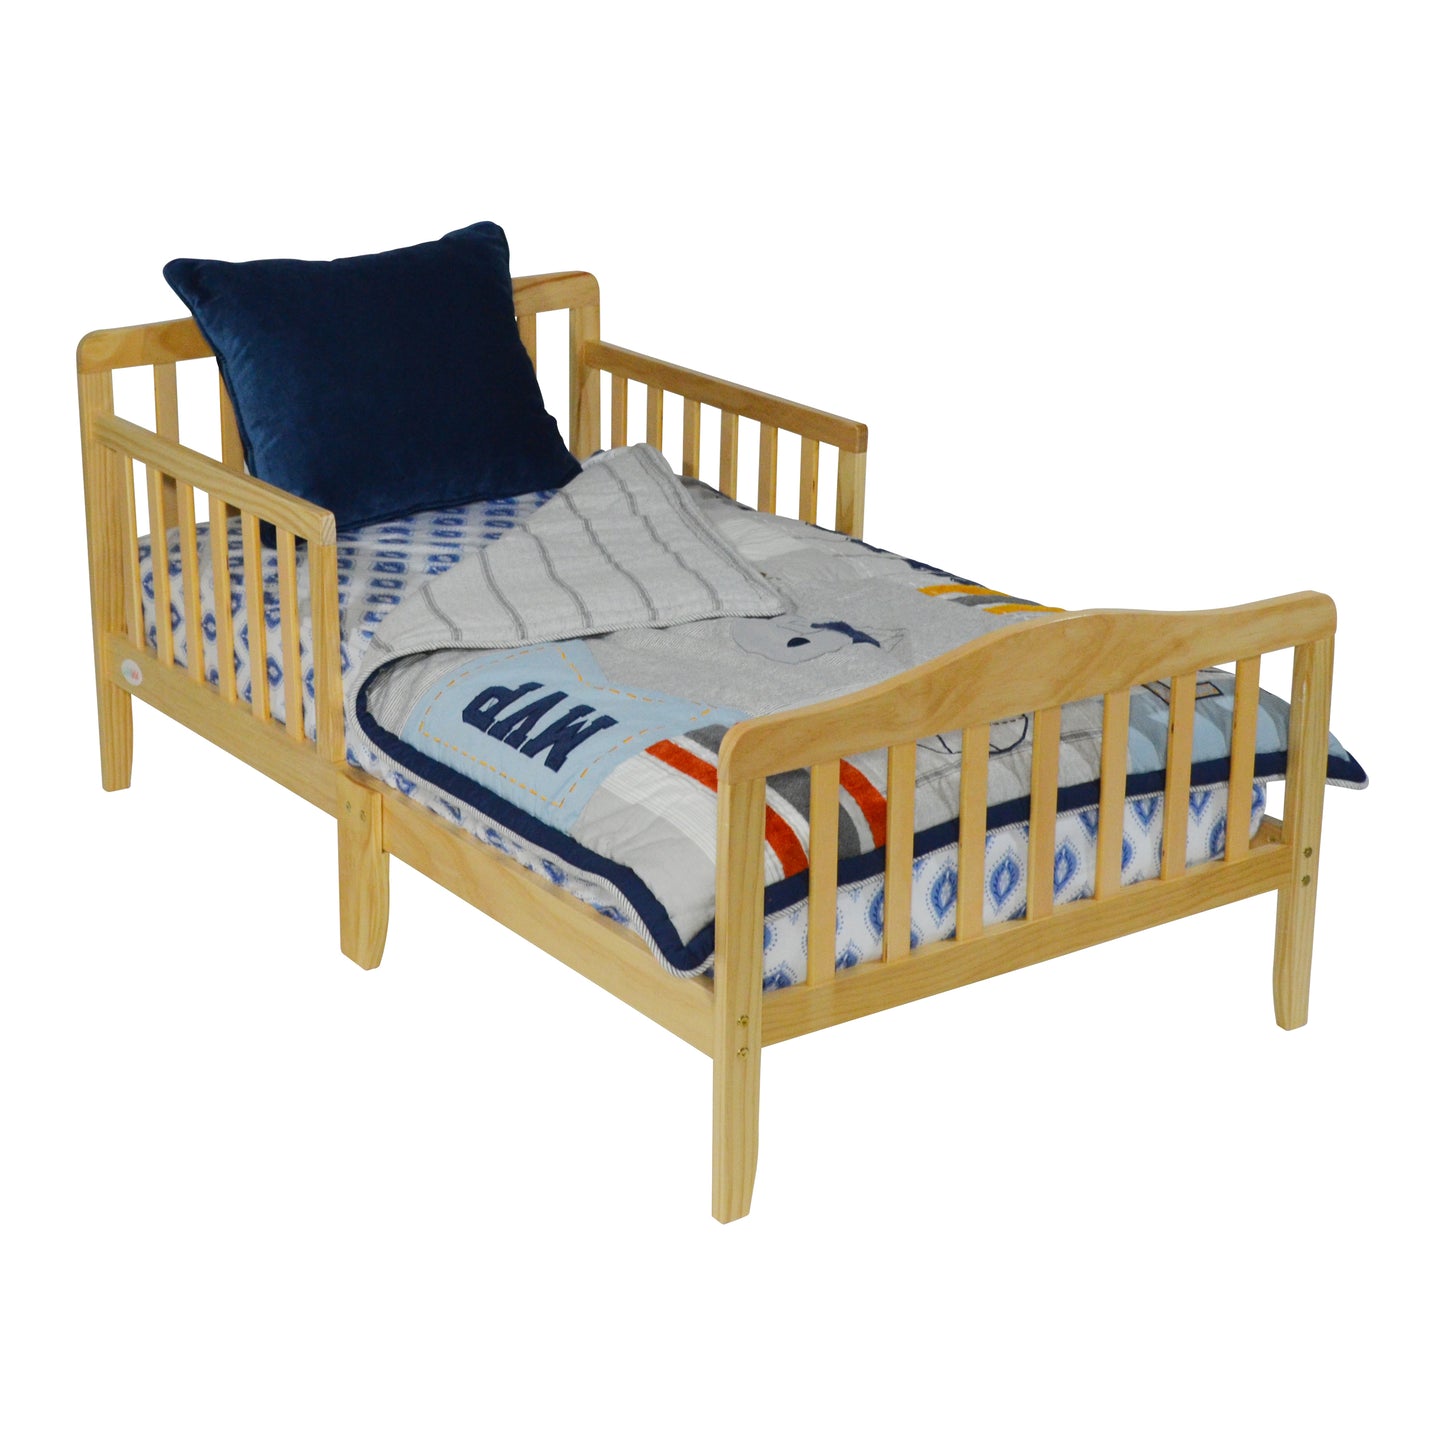 Blaire Toddler Bed Natural